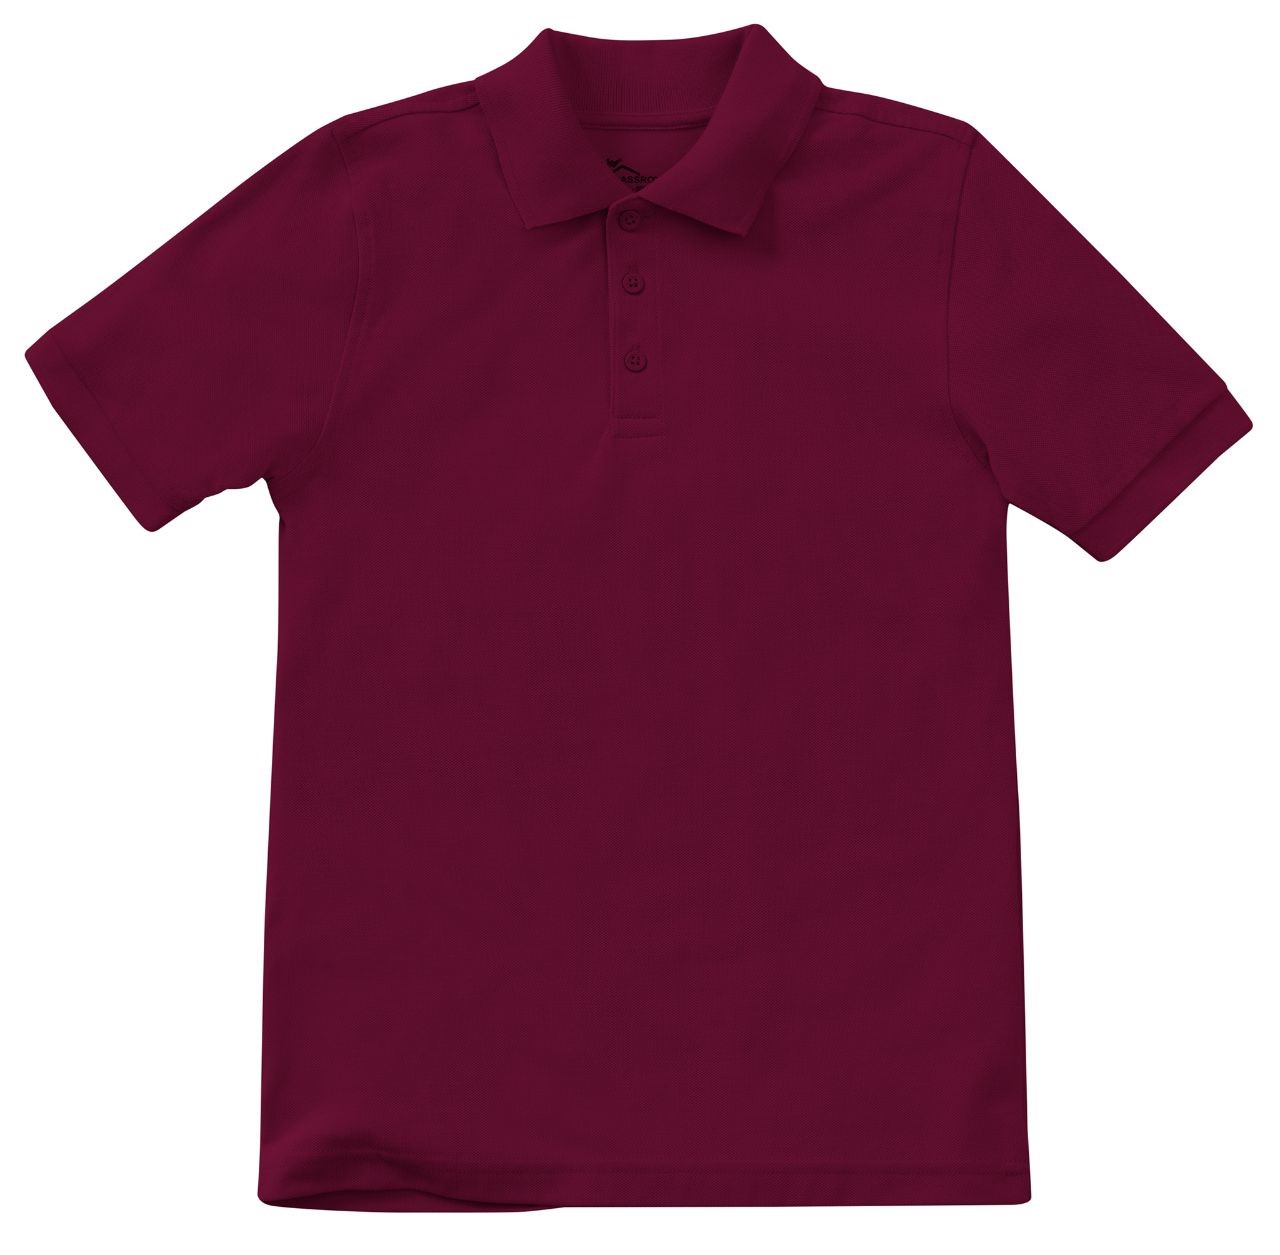 FLA-Youth Short sleeve pique polo shirt with logo(Middle school)